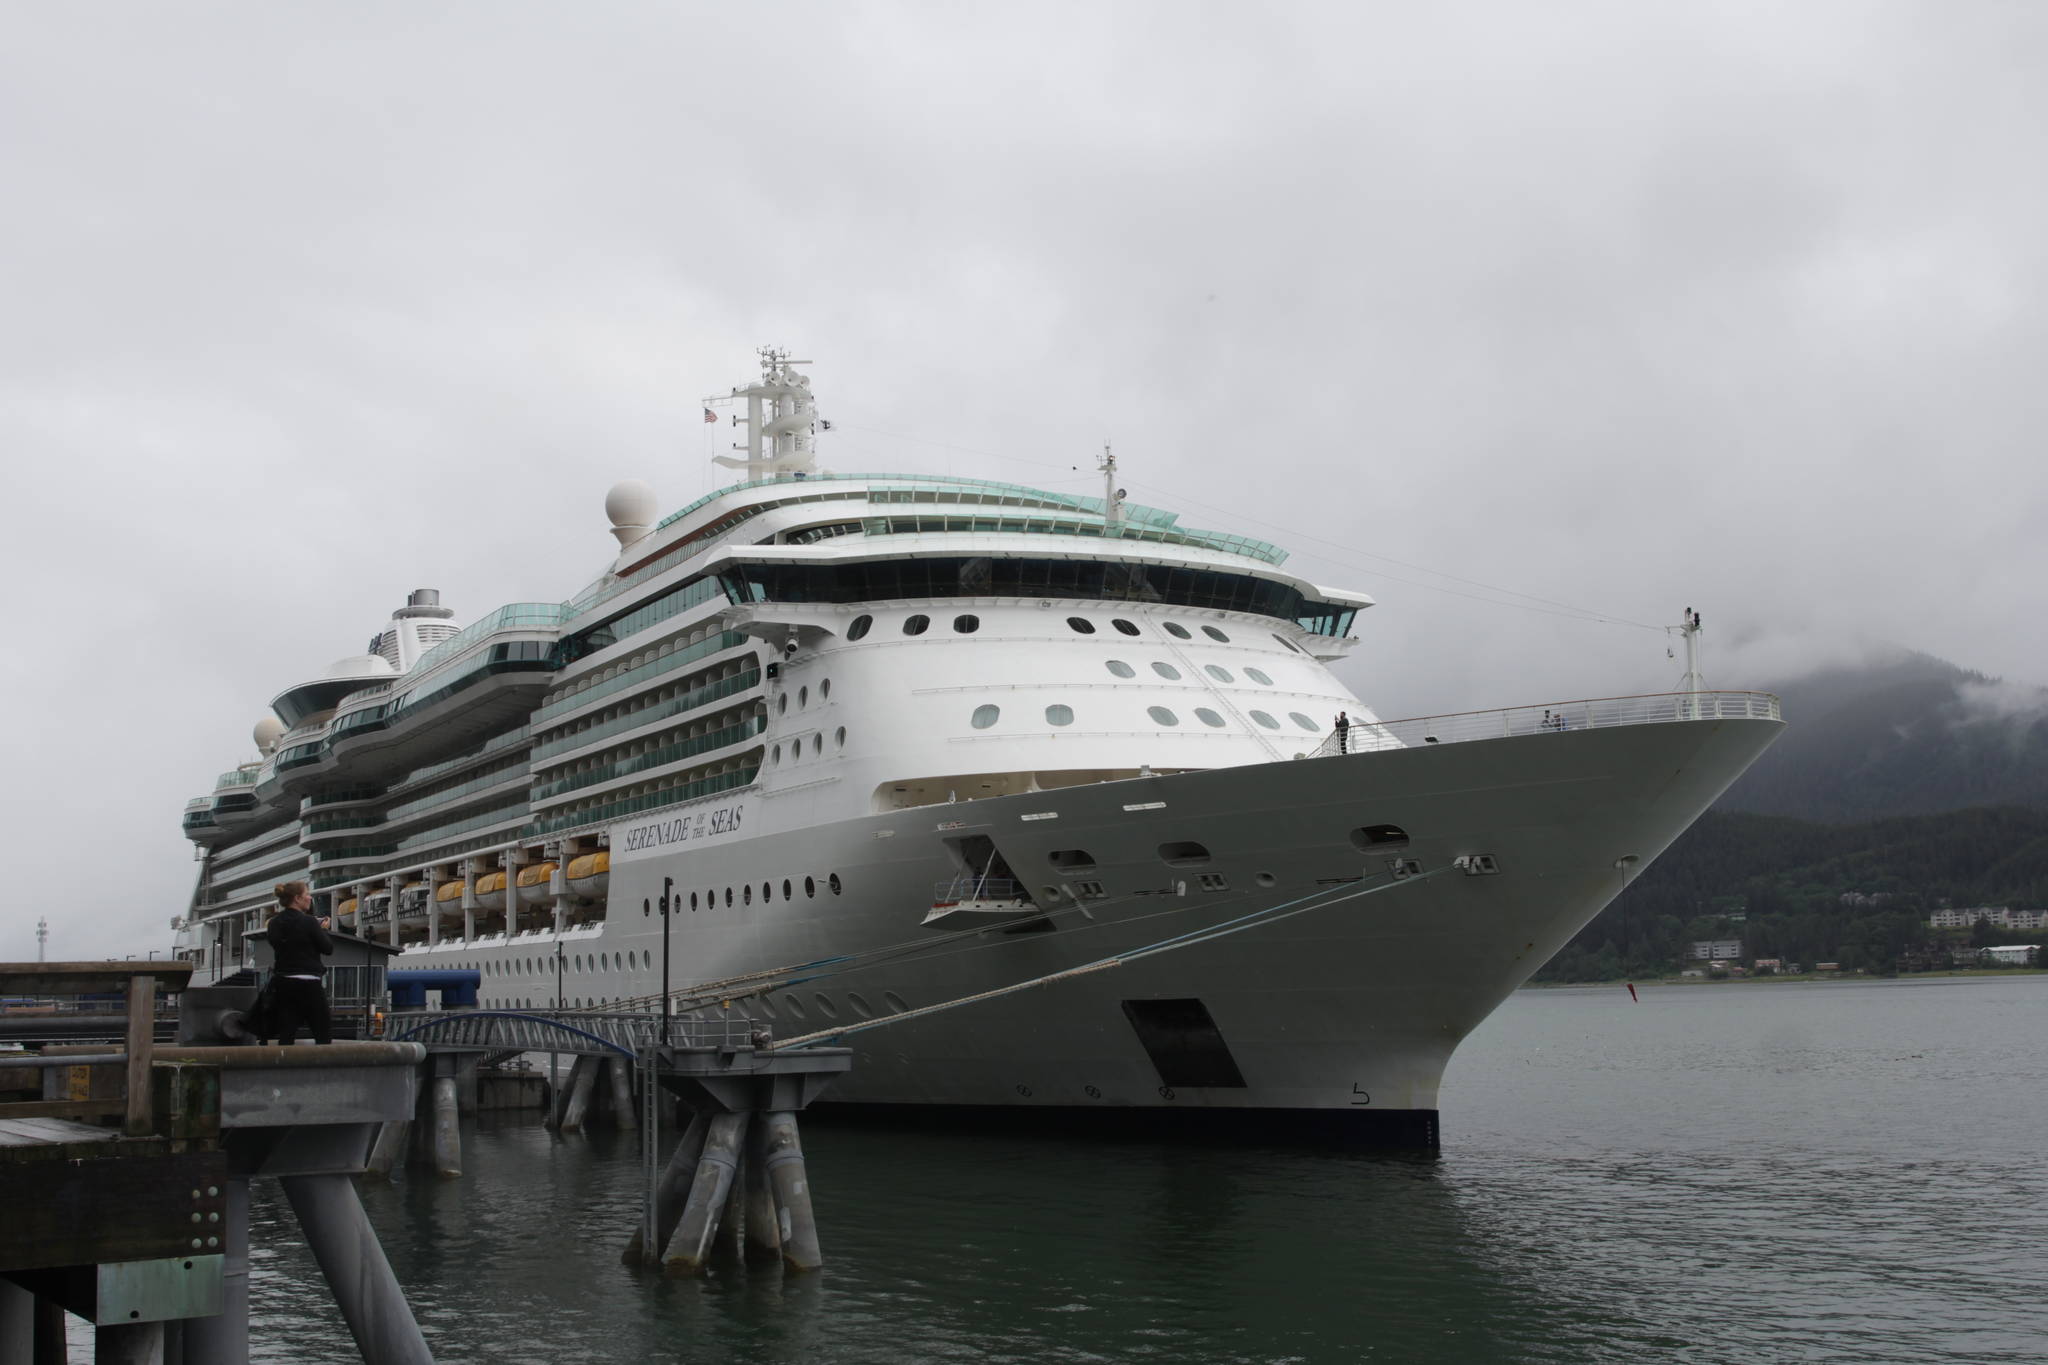 The Serenade of the Seas arrived in Juneau early Friday morning, seen here moored downtown. The Royal Caribbean cruise ship is the first large cruise ship to come to Juneau since the pandemic caused the cancellation of the 2020 cruise ship season and delayed the 2021 season. (Michael S. Lockett / Juneau Empire)